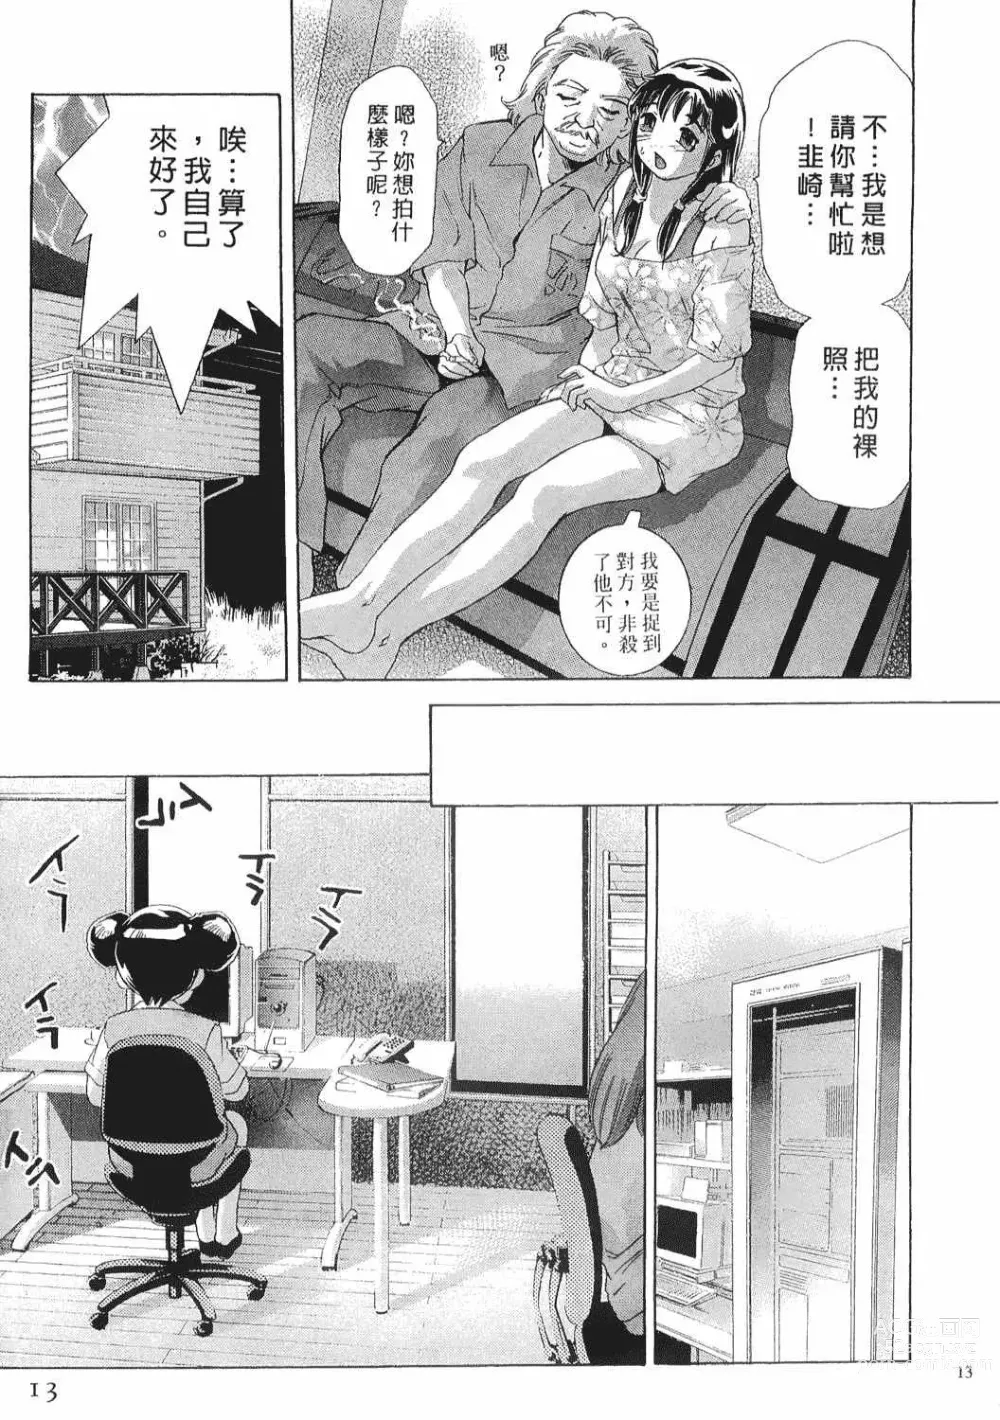 Page 12 of manga Mehyou - Female Panther Vol. 8